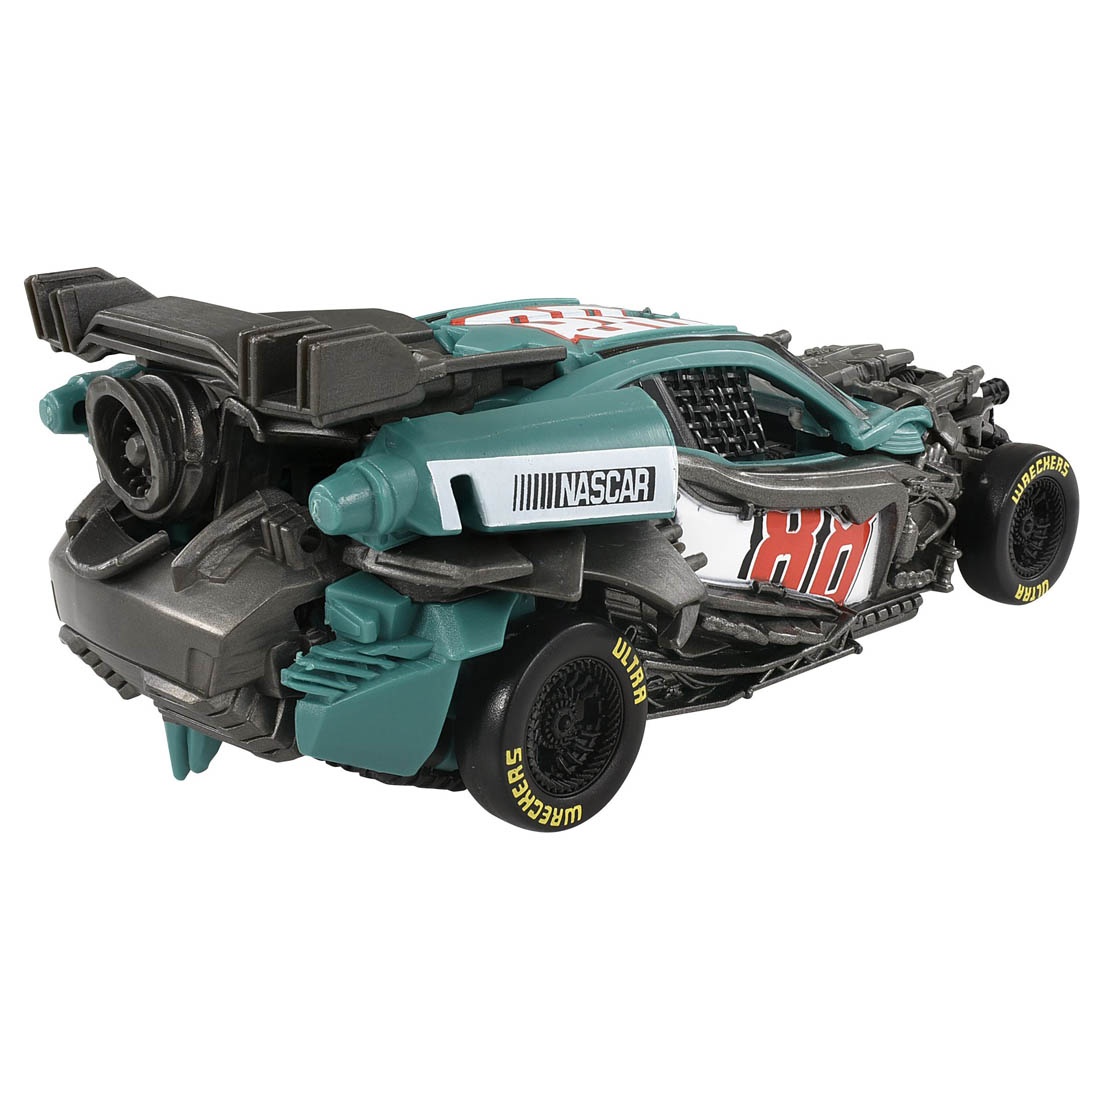 Takara Tomy Transformers Ss-50 Road Buster Japan for sale online